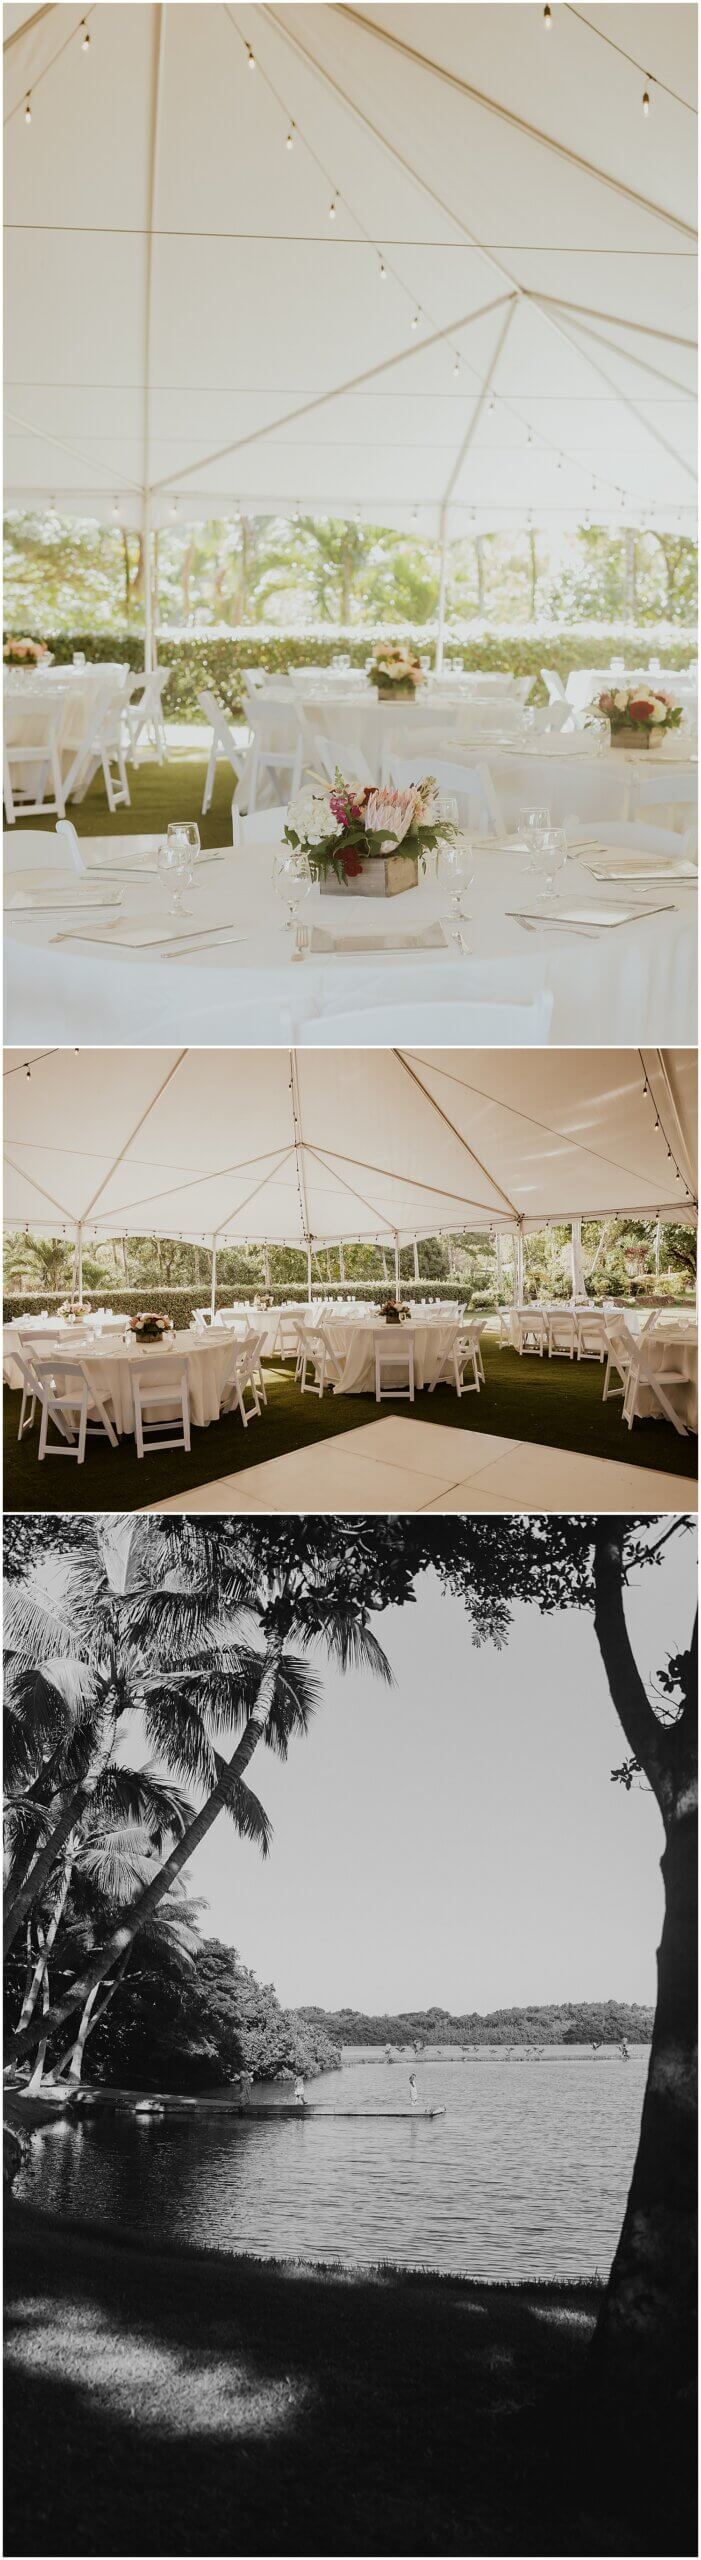 Reception tent set up on Kualoa ranch property with white tables and chairs by Oahu wedding photographer 